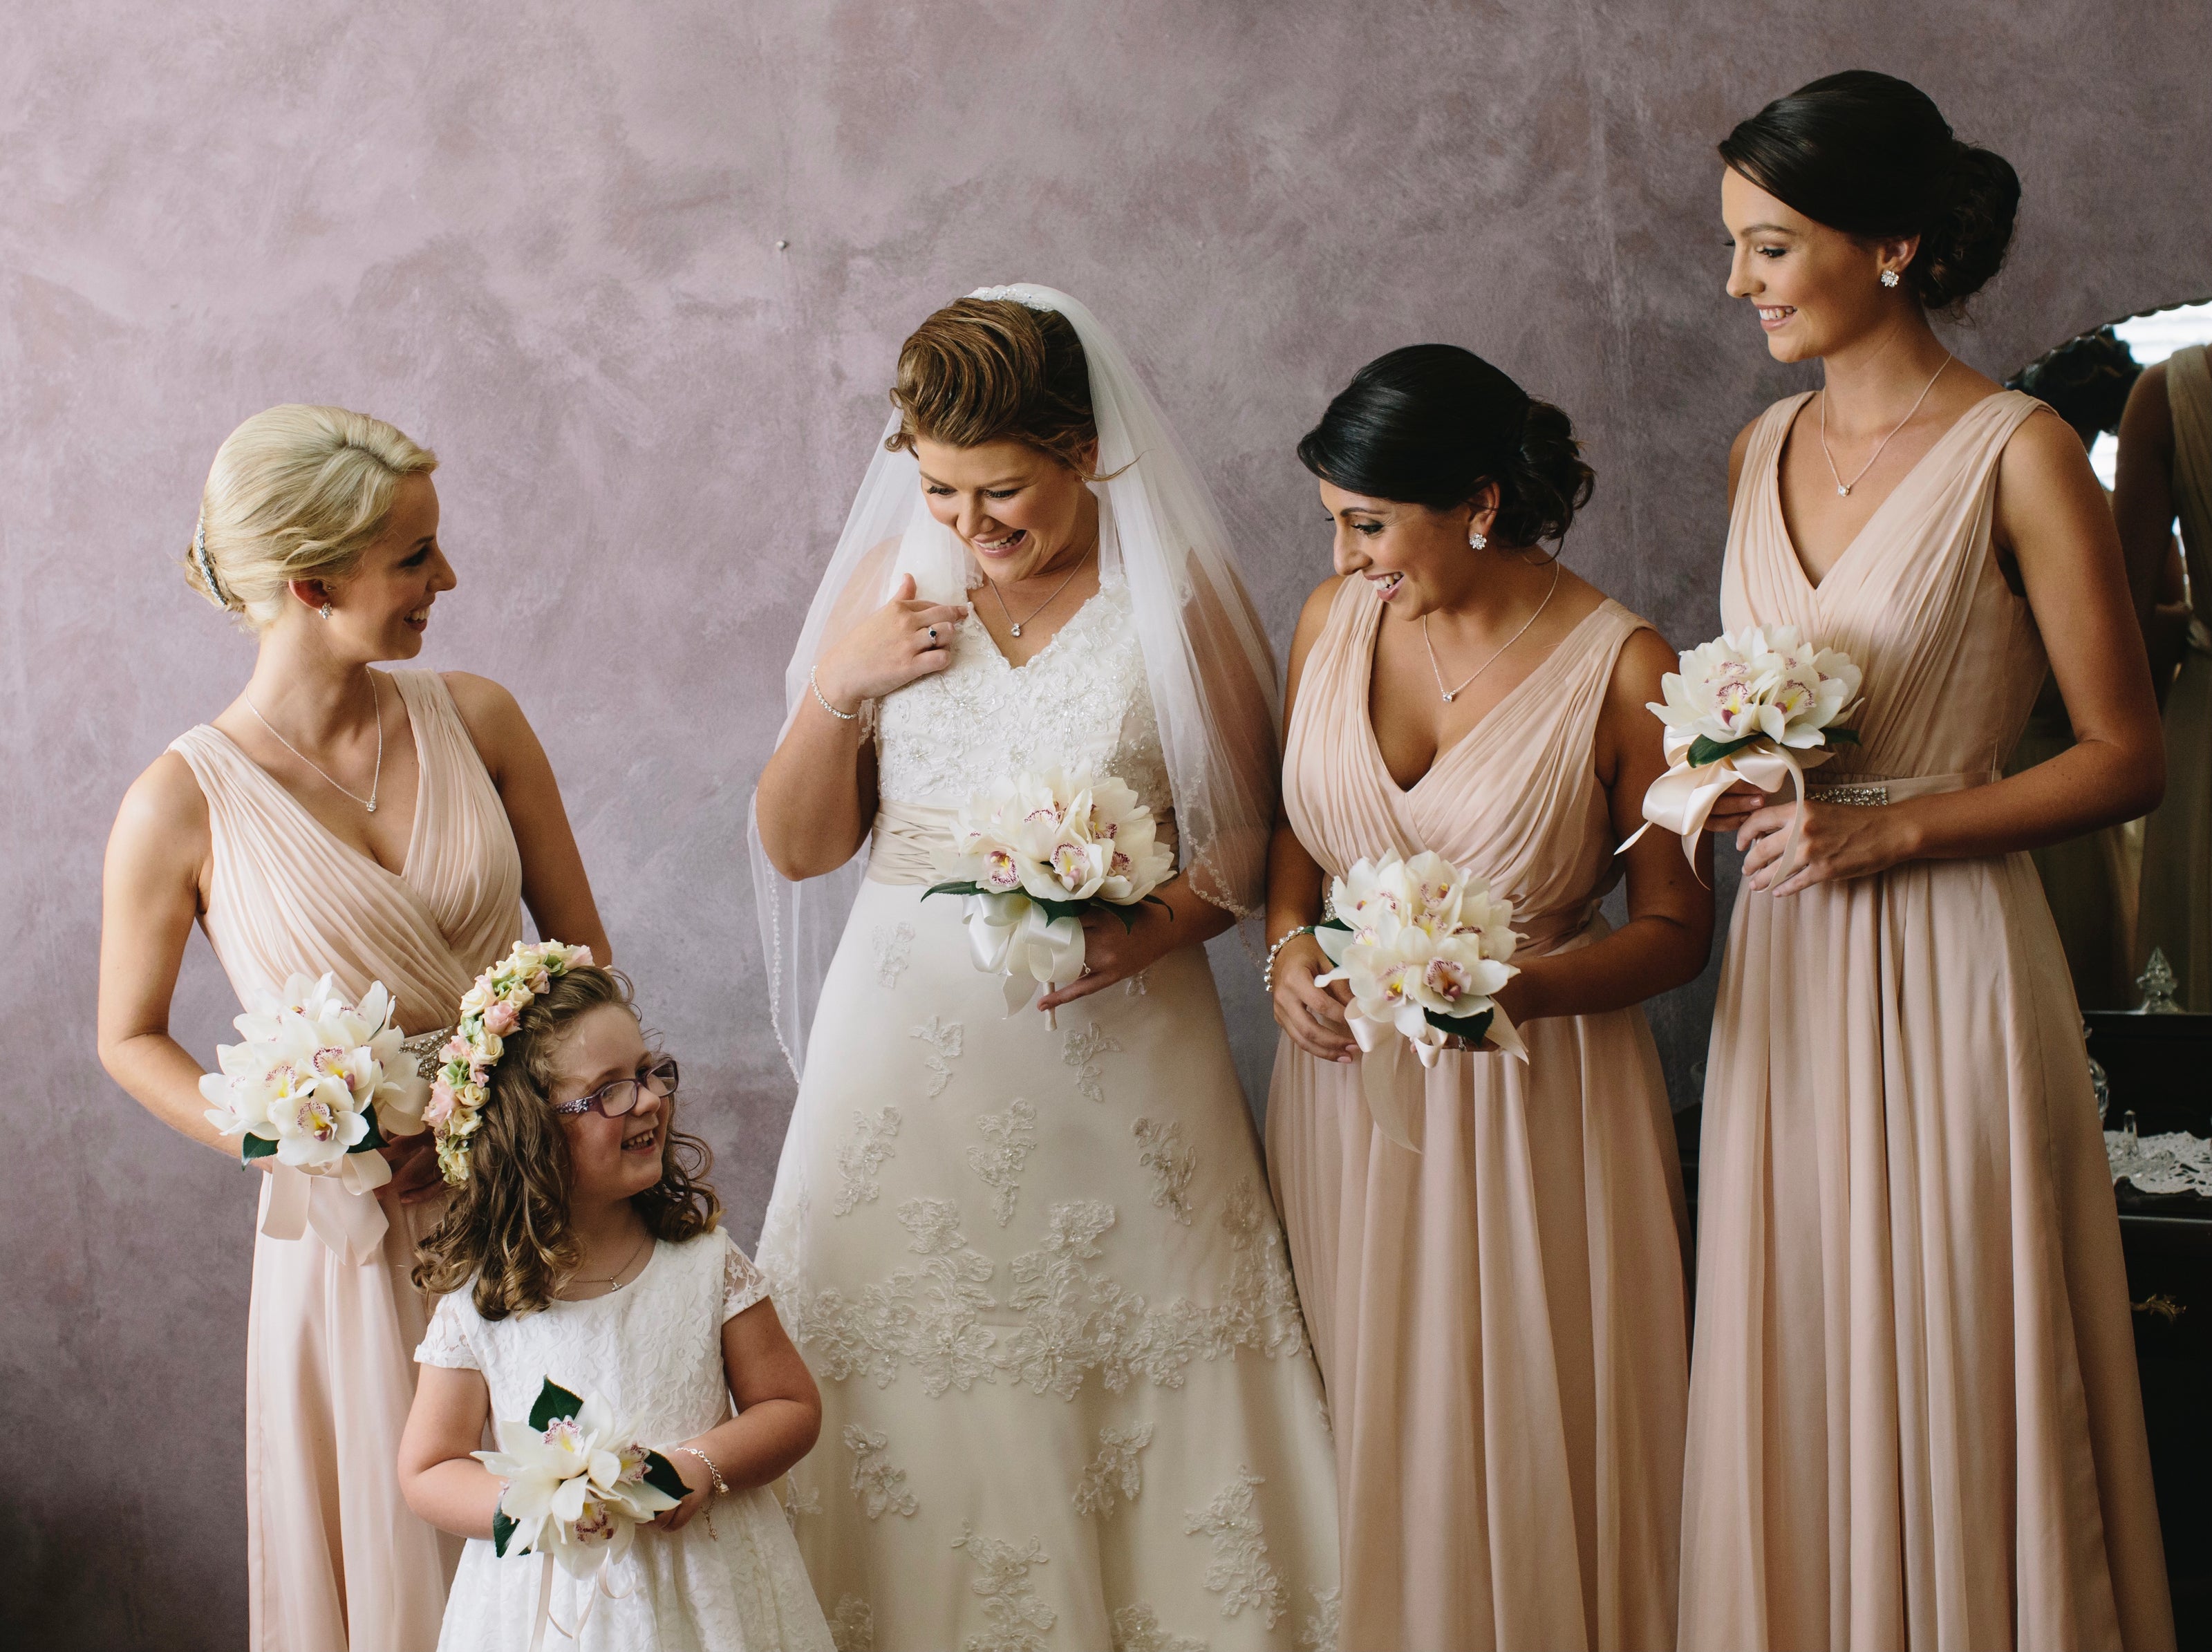 A bride standing with her bridesmaids holding wedding bouquet flowers.